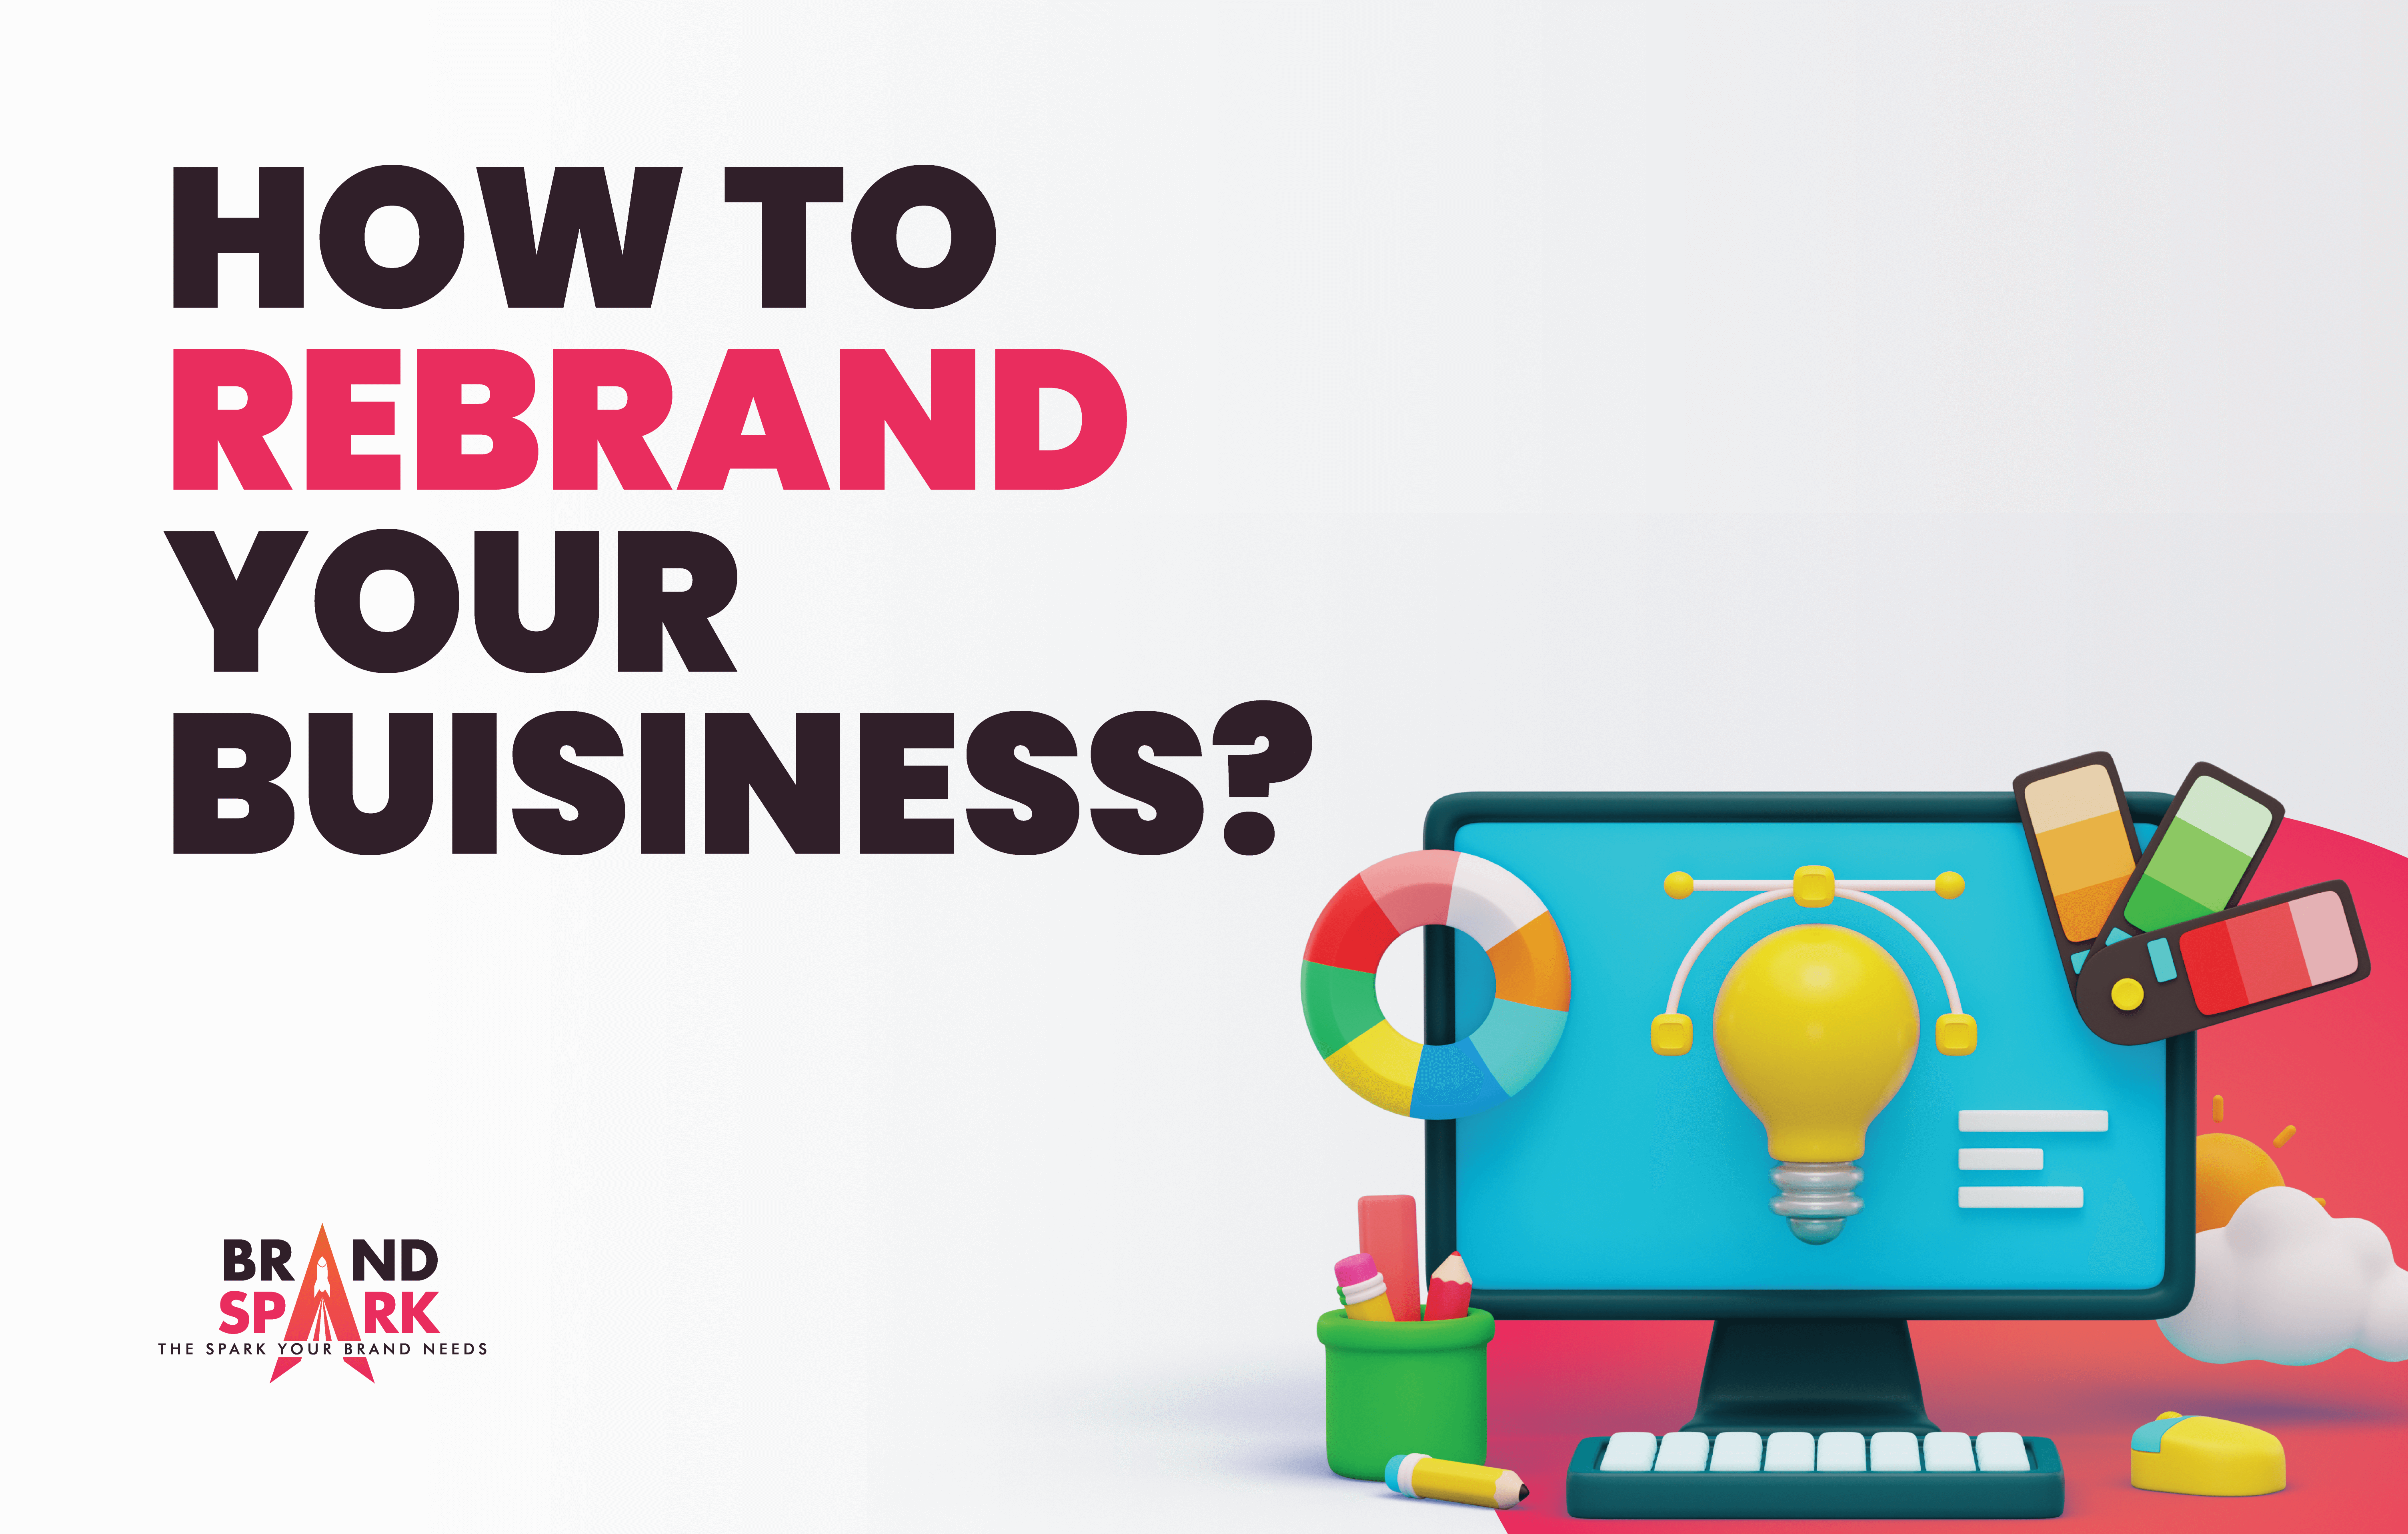 How To Rebrand Your Business?